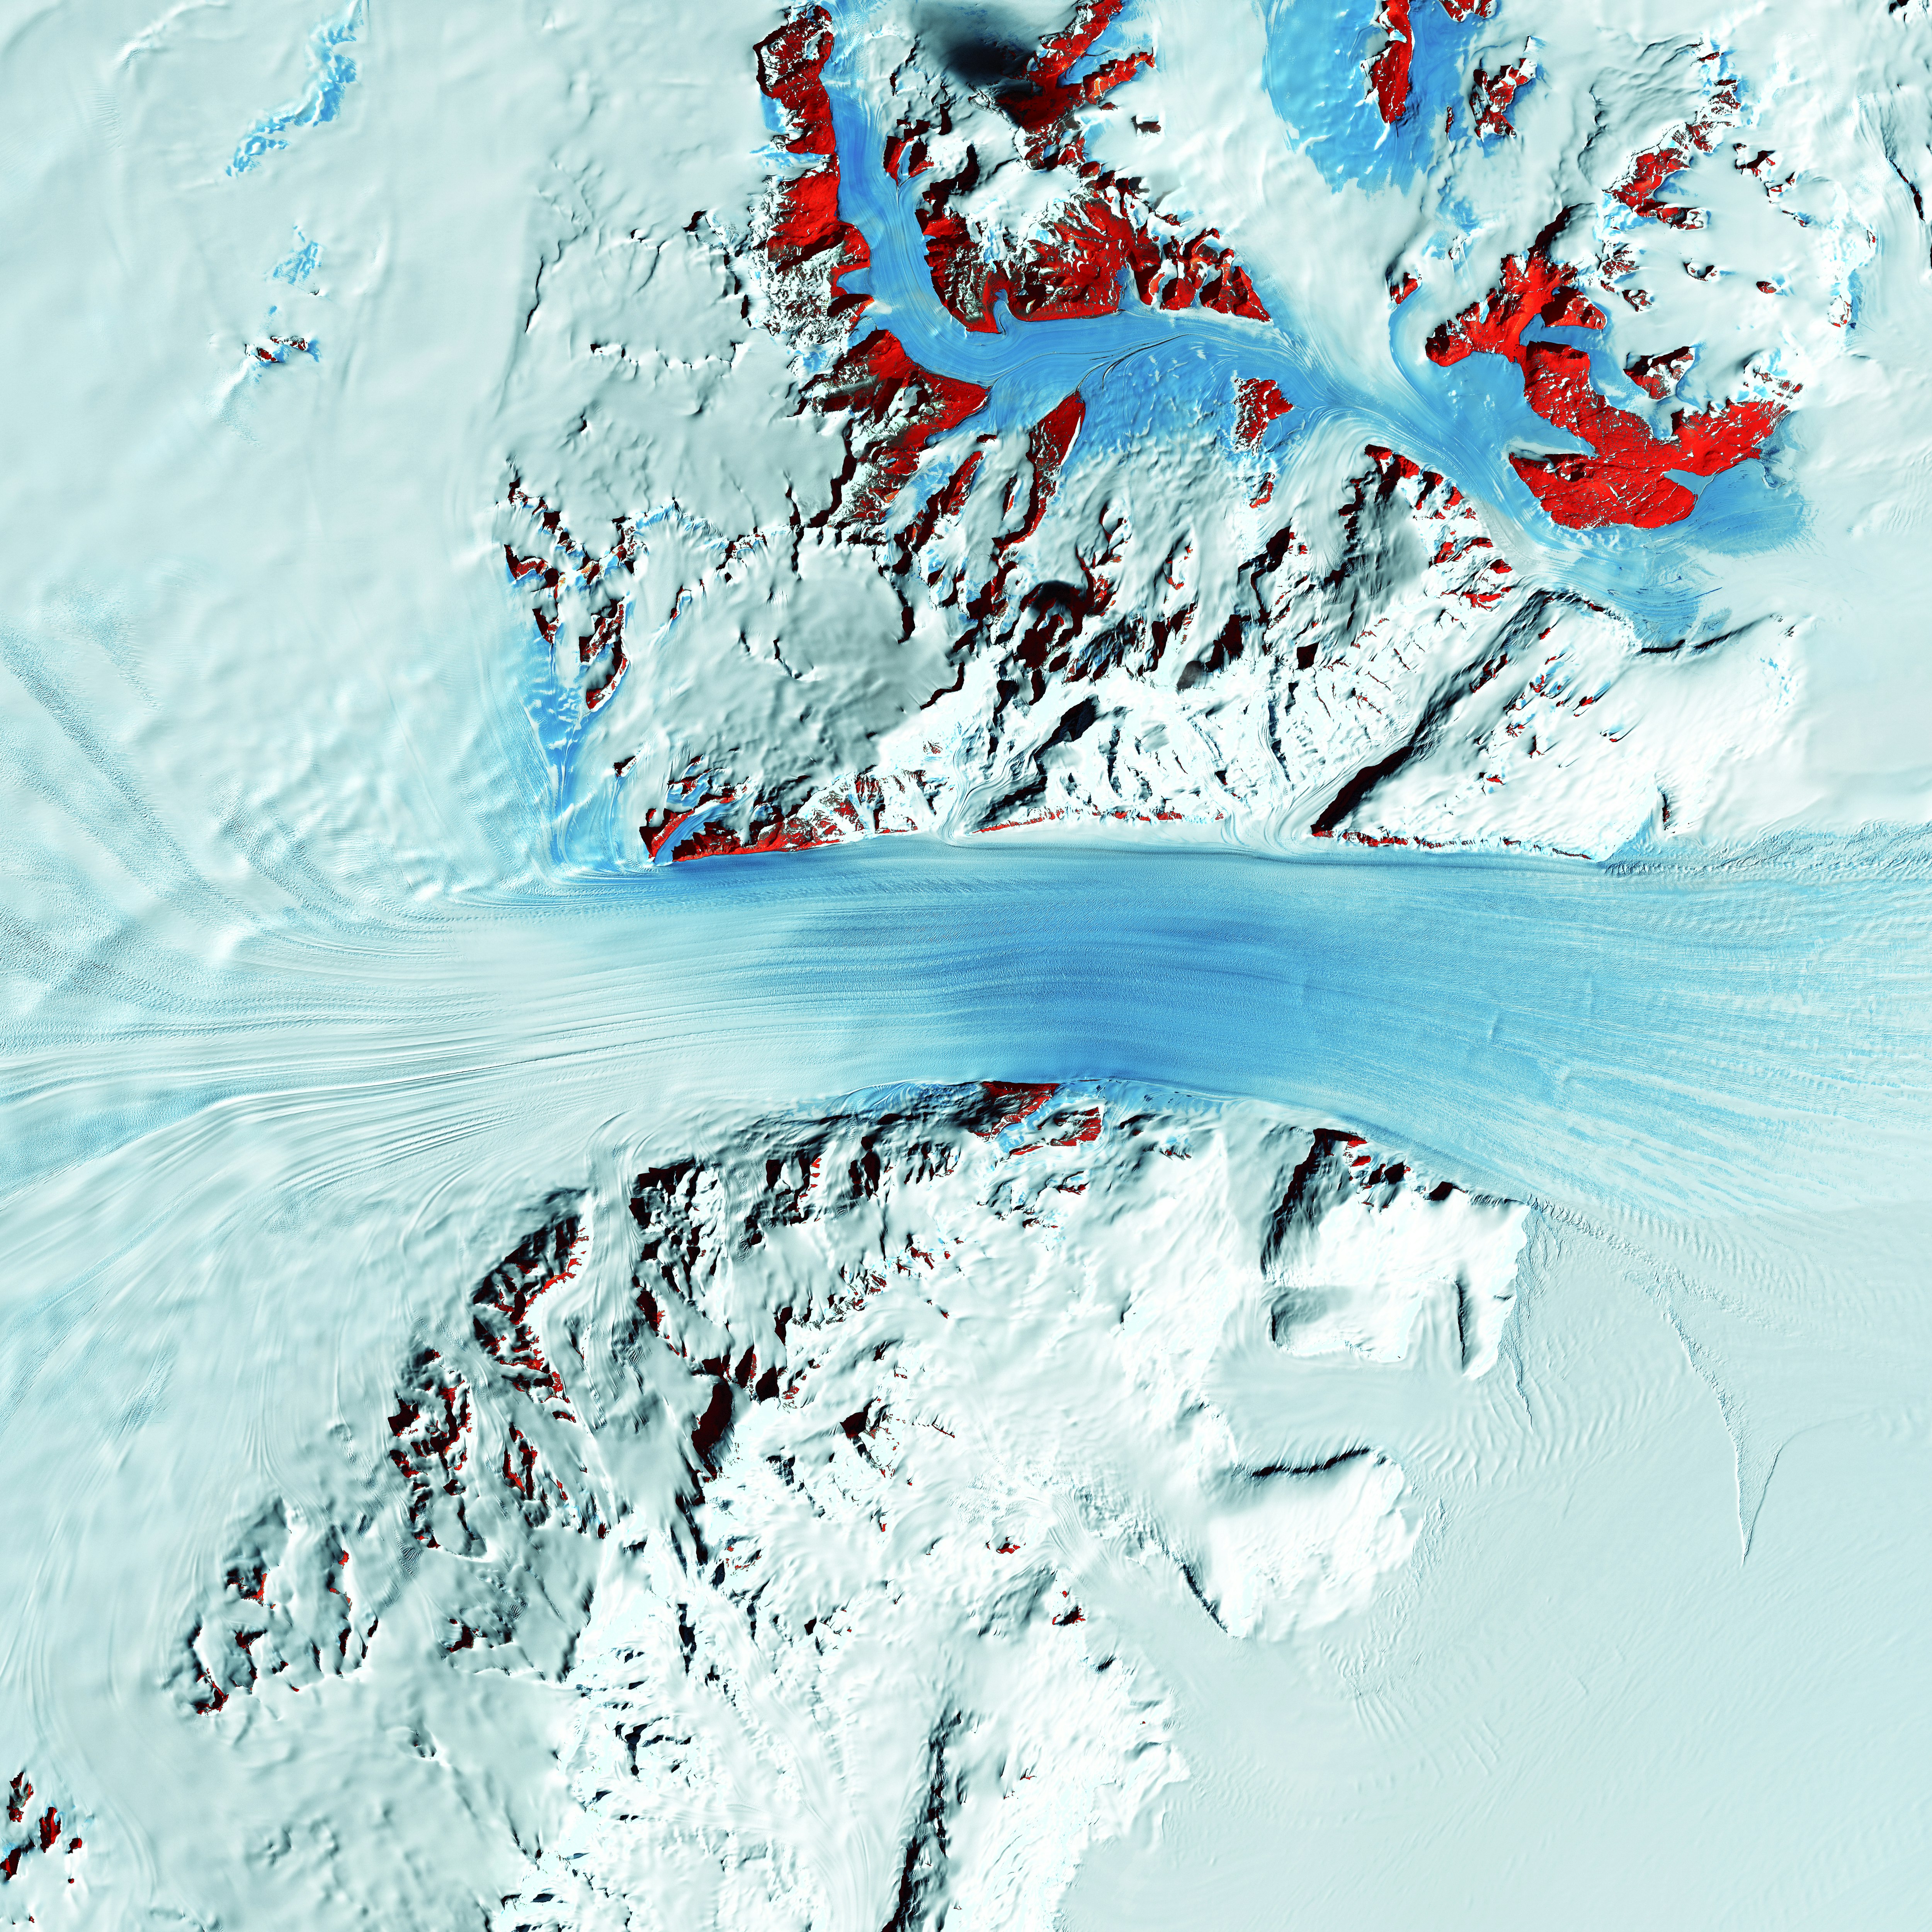 Truly a river of ice, Antarctica's relatively fast-moving Byrd Glacier courses through the Transantarctic Mountains at a rate of 0.8 kilometers (0.5 miles) per year. More than 180 kilometers (112 miles) long, the glacier flows down from the polar plateau (left) to the Ross Ice Shelf (right). Long, sweeping flow lines are crossed in places by much shorter lines, which are deep cracks in the ice called crevasses. The conspicuous red patches indicate areas of exposed rock.